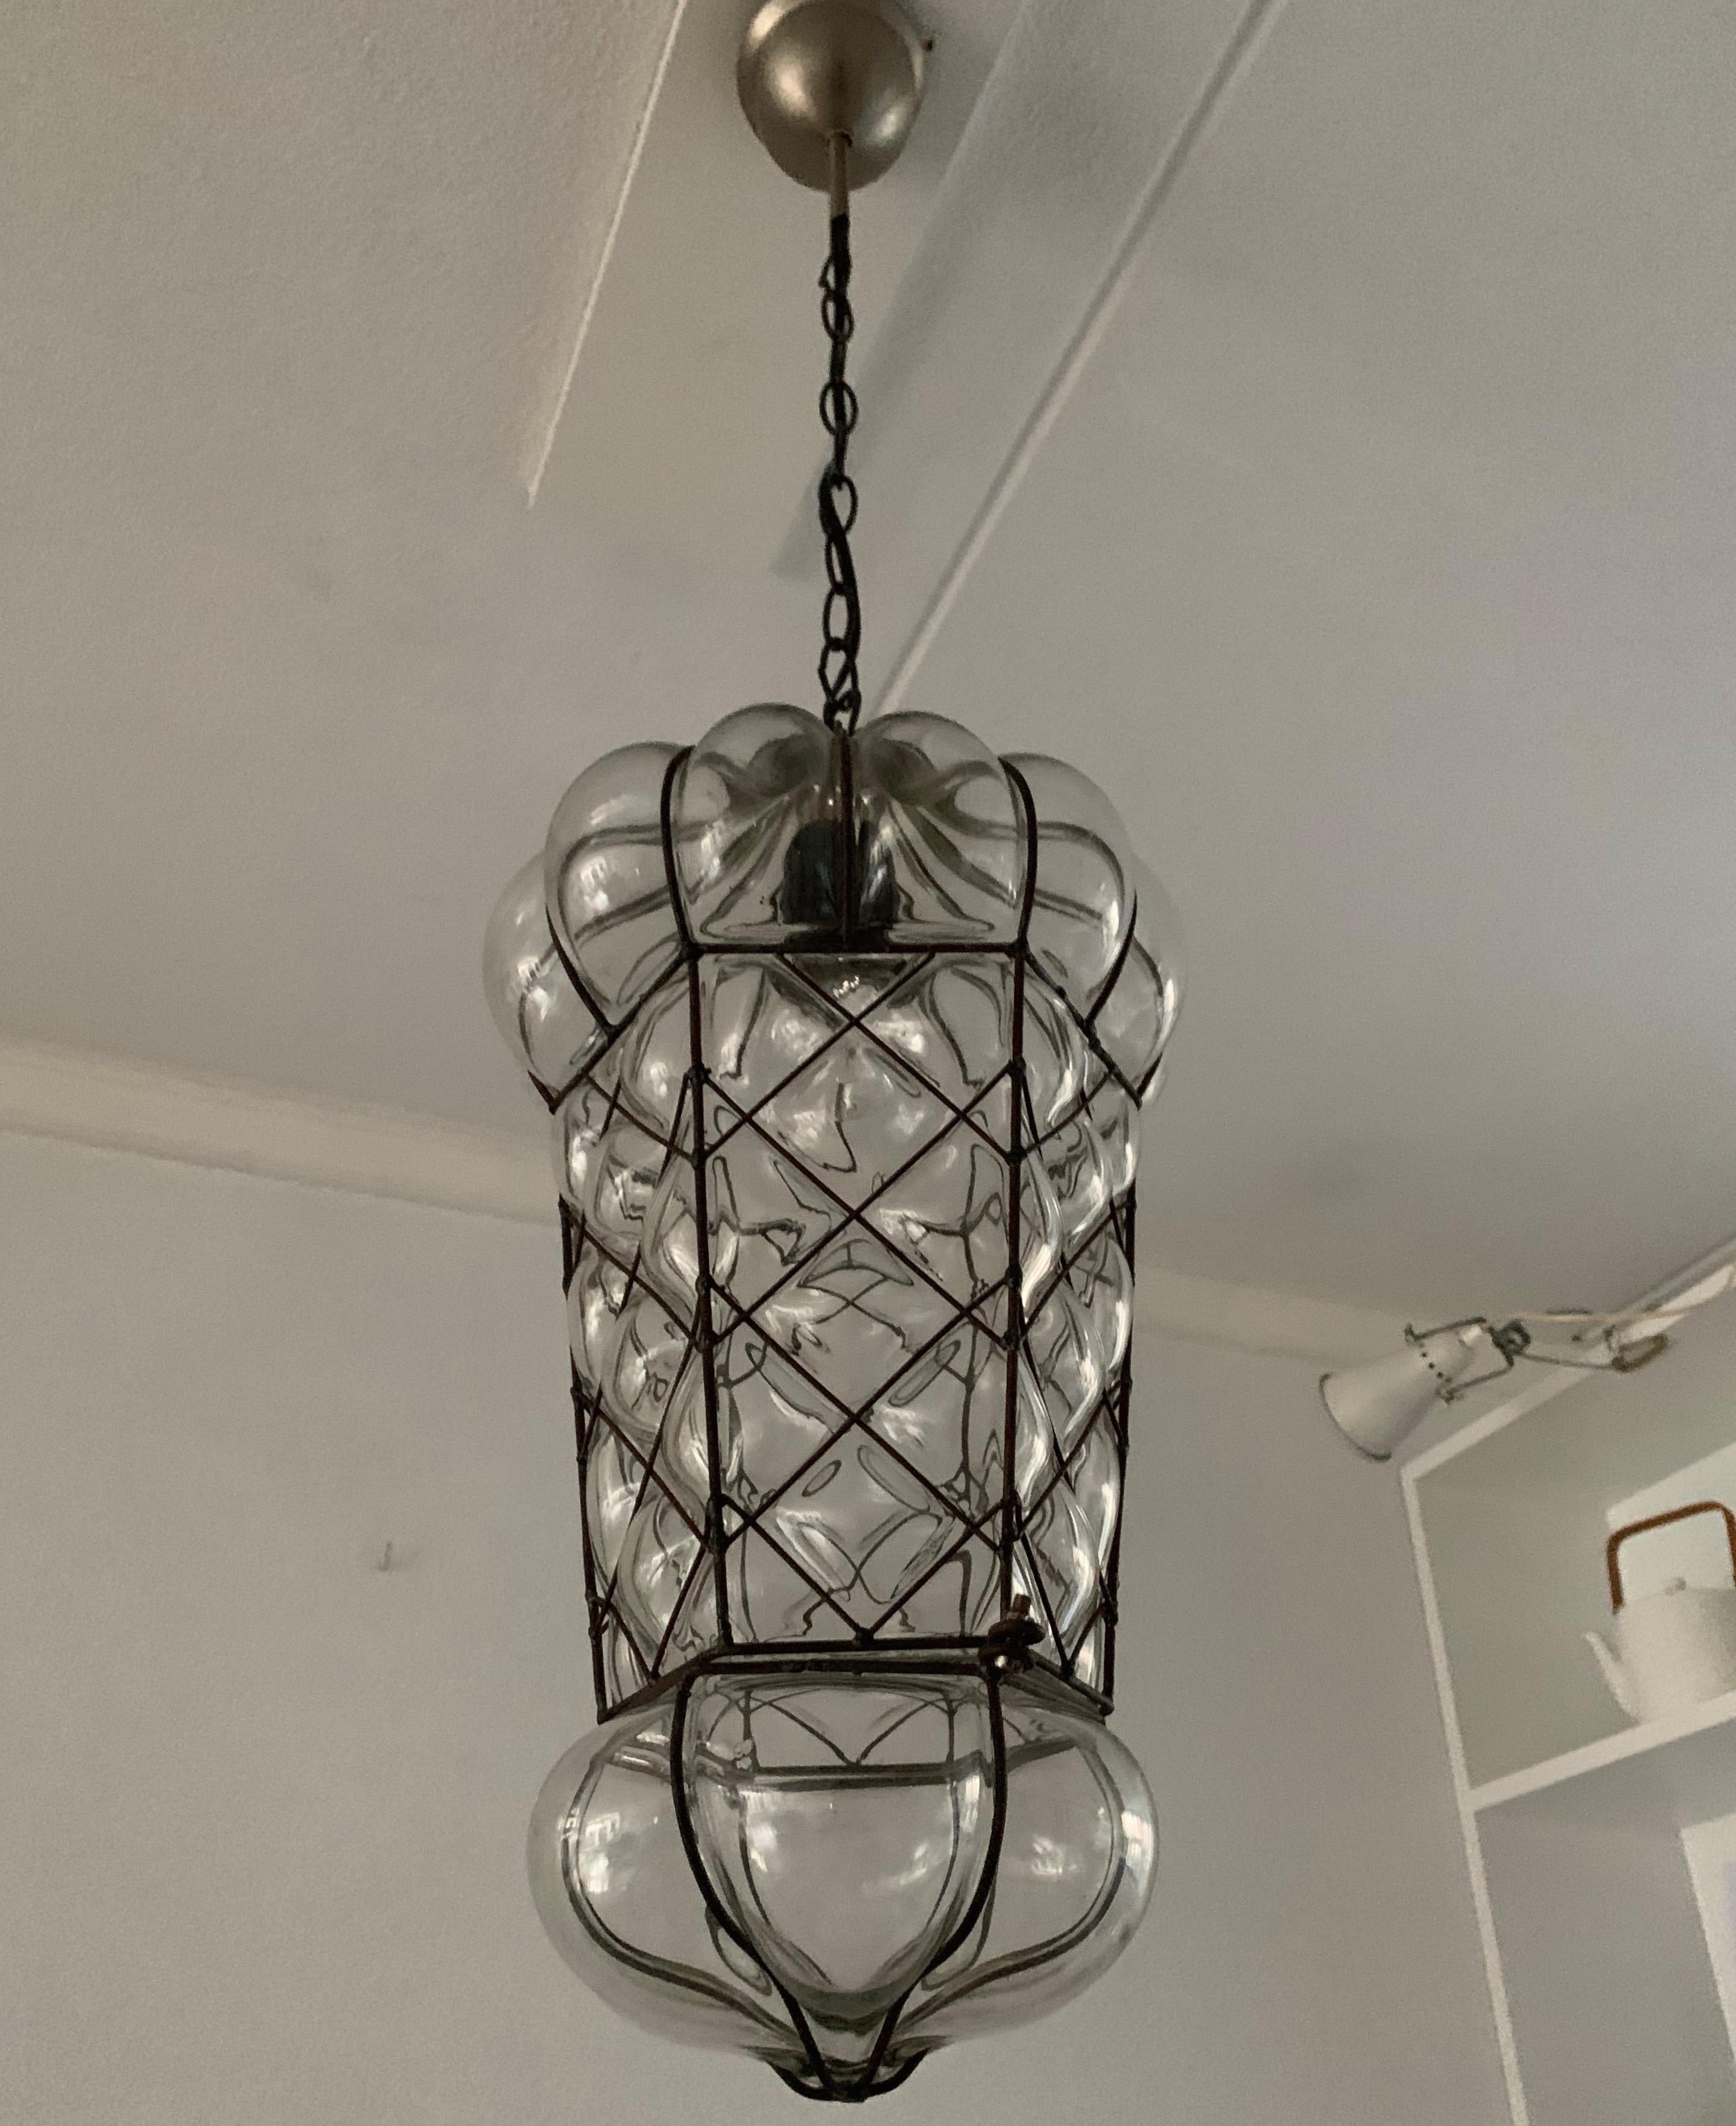 Great condition transparent glass light fixture.

This large size and very decorative pendant is one of our latest finds and we have the pleasure of offering it to you in this excellent condition. We have completely rewired it for safe and immediate